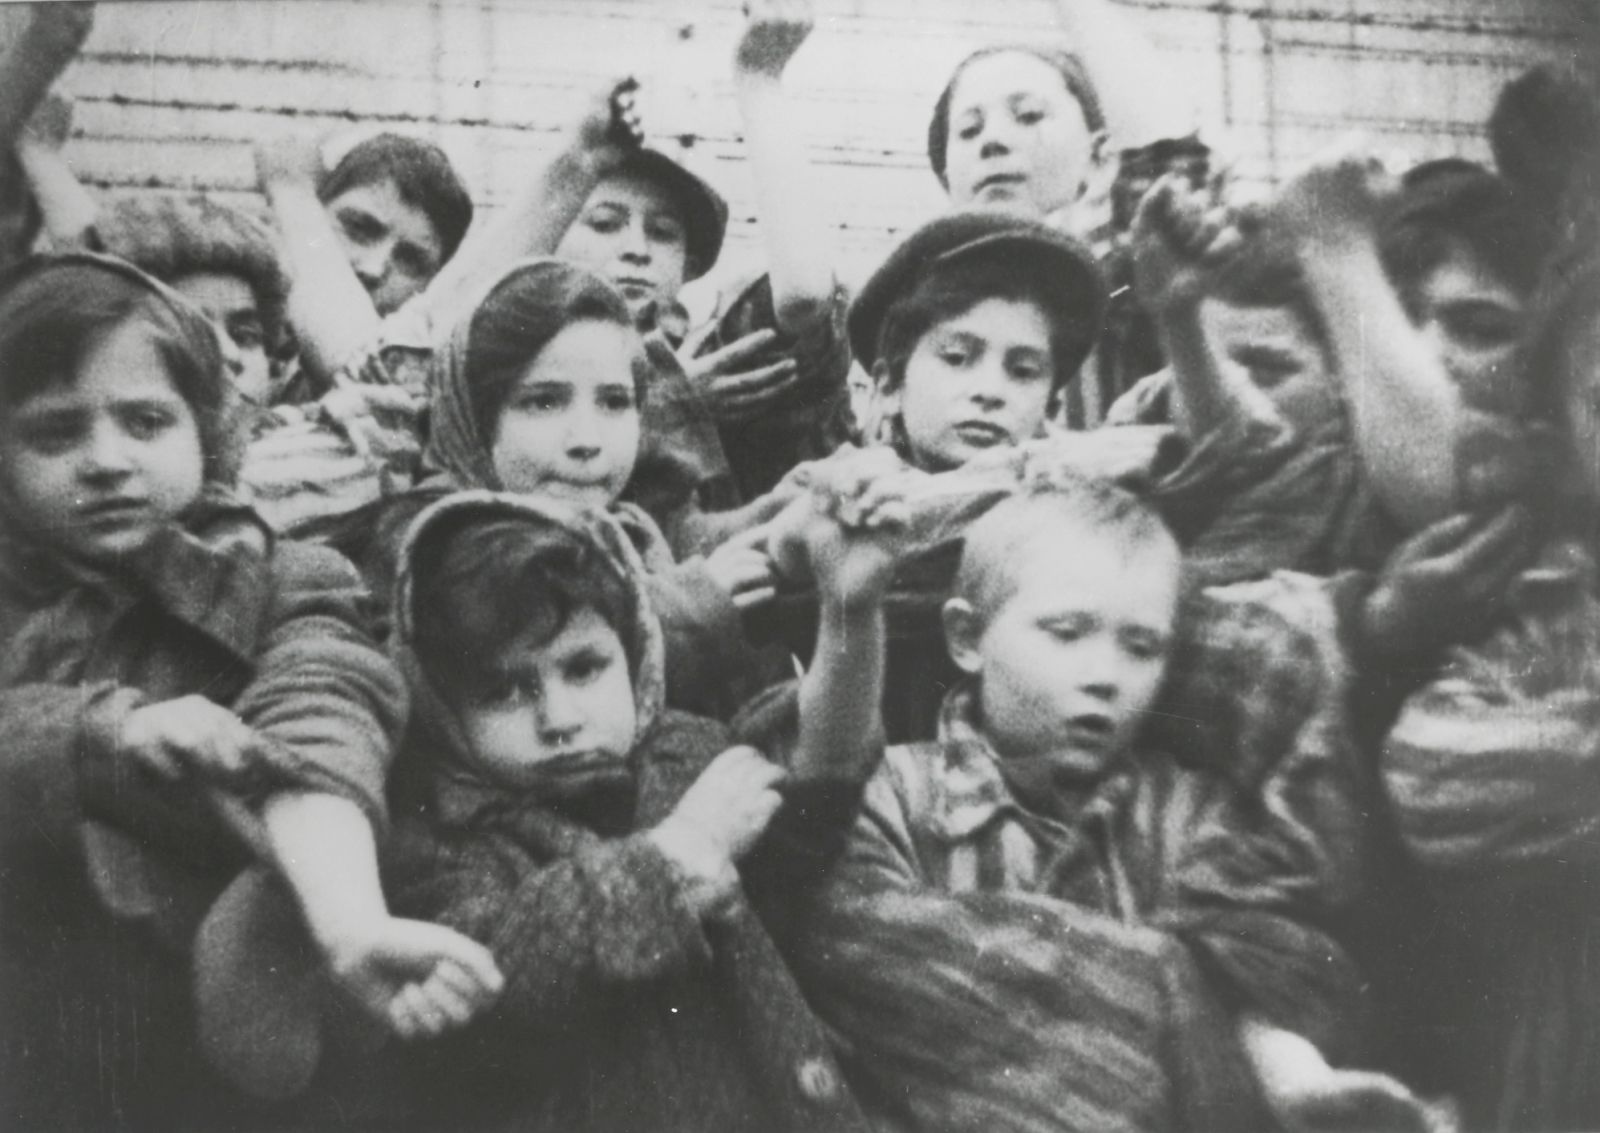 epa08966064 A handout photo made available by the Auschwitz Memorial and Museum shows the children in the Auschwitz-Birkenau concentration camp in Oswiecim showing their tatooed numbers on their arms after the liberation at the former German Nazi concentration and extermination camp Auschwitz-Birkenau in Oswiecim, Poland, January 1945 (reissued 26 January 2021). The 76th anniversary of the liberation of the largest German Nazi concentration and death camp on 27 January 1945, will be commemorated online due to the coronavirus Covid-19 pandemic, with online broadcast and discussion panels focused on the fate of children in Auschwitz. The liberation of the Auschwitz-Birkenau is commemorated as International Holocaust Remembrance Day worldwide. The biggest German Nazi death camp KL Auschwitz-Birkenau was a complex of over 40 concentration and extermination camps operated by Nazi Germany near Oswiecim in occupied Poland during World War II, and a central site in the Nazis' plan to the so-called 'Final Solution' and the Holocaust (Shoa). It is estimated that 1.3 million people were sent to Auschwitz, and 1.1 million died there including 960,000 Jews, 74,000 non-Jewish Poles, 21,000 Roma people, 15,000 Soviet prisoners of war, and up to 15,000 other Europeans. Prisoners who were not gassed in chambers died of starvation, exhaustion, disease, individual executions, beatings or were killed during medical experiments. According to data from Auschwitz memorial,  at least 232,000 children and young people were deported to Auschwitz, of whom 216,000 were Jews, 11,000 Roma, about 3,000 Poles, more than 1,000 Belarusians, and several hundred Russians, Ukrainians, and others. A total of about 23,000 children and young people were registered in the camp. Slightly more than 700 were liberated on the territory of Auschwitz in January 1945.  EPA/www.auschwitz.org / HANDOUT  HANDOUT EDITORIAL USE ONLY/NO SALES *** Local Caption *** 55790113